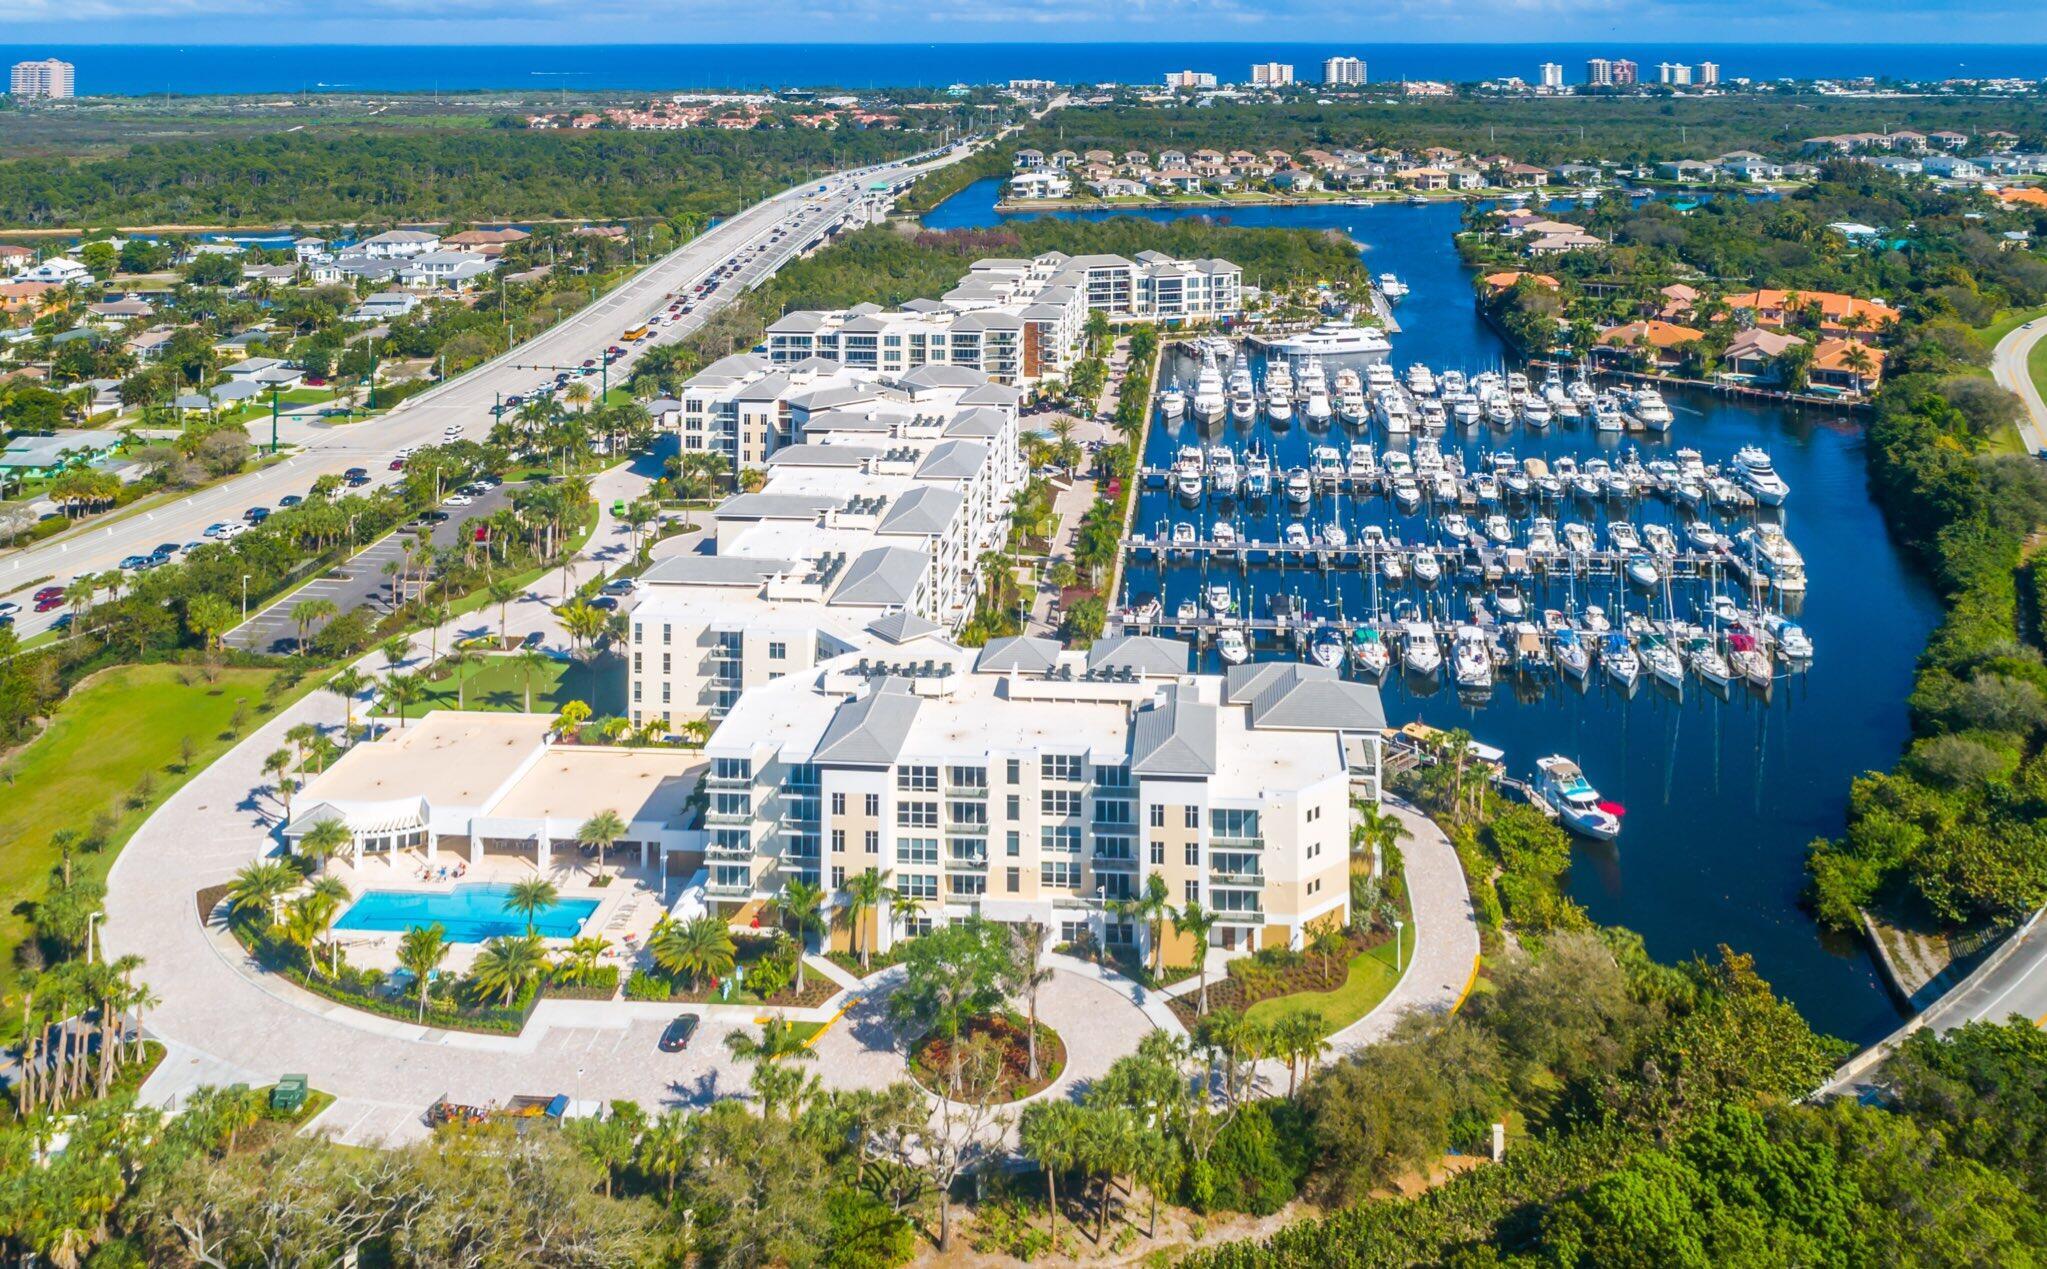 Nestled beside a serene private marina, this luxurious three bedroom condo offers panoramic views of sparkling waters, Built in 2018, its modern design seamlessly blends elegance with functionality.  With three bedrooms and 3 and 1 half baths, each bedroom boast comfort and style. Residents enjoy exclusive access to amenities include 2 community pools, state of the art fitness center, golf simulator and your own private wine locker.  The card room and billiard room provide spaces for leisure and entertainment, making every day feel like a retreat in this waterfront paradise. Get ready to enjoy the delightful views from your balcony overlooking the marina from this top floor penthouse. You will truly be impressed.